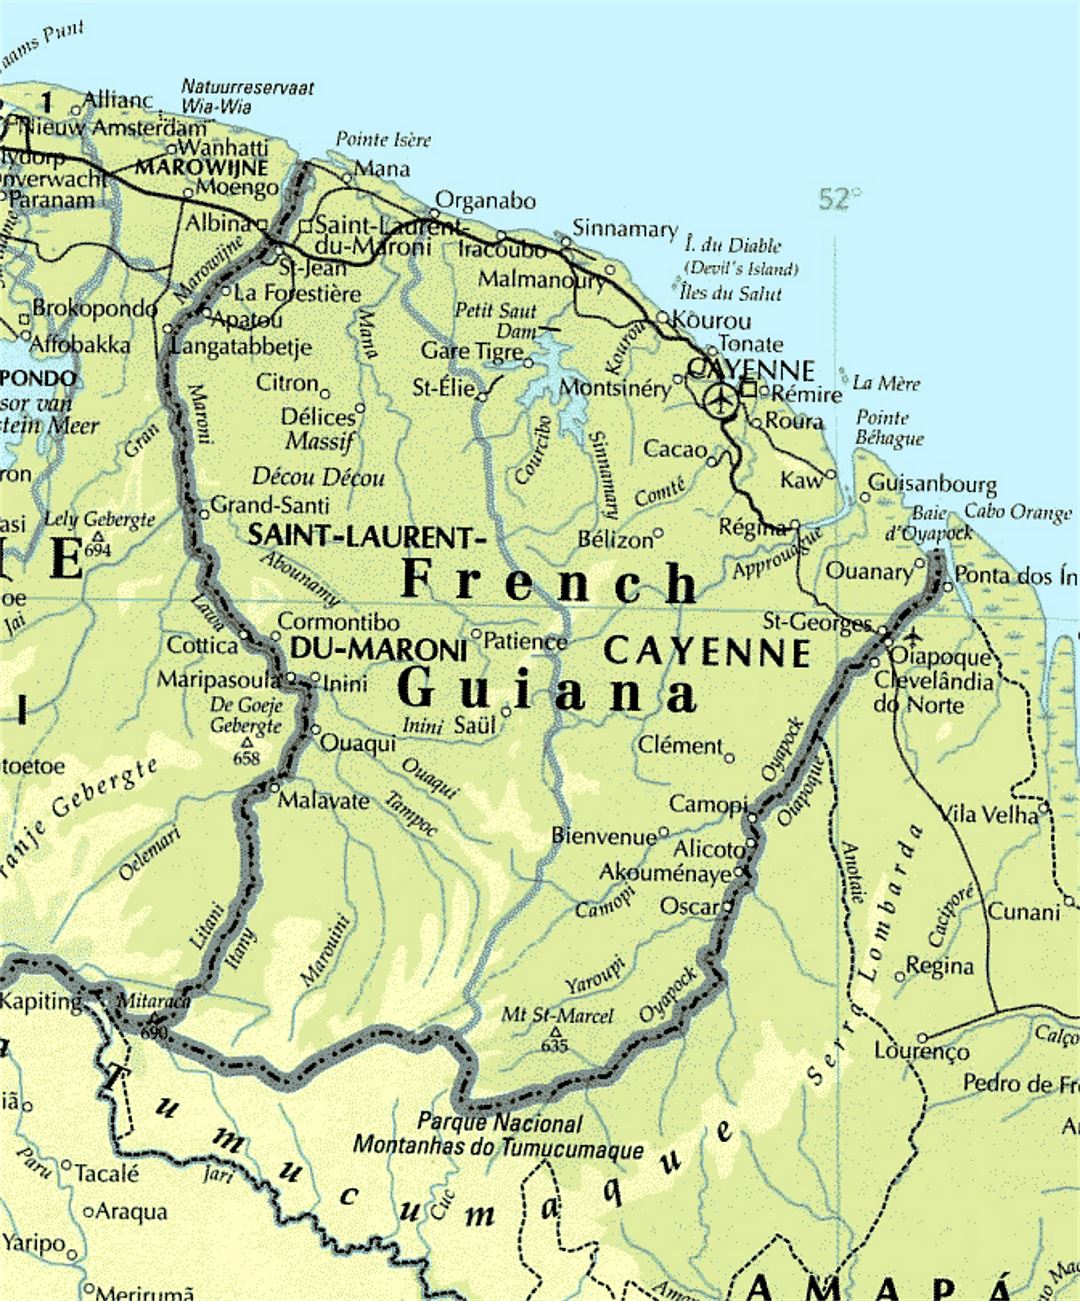 Detailed map of French Guiana with roads and cities